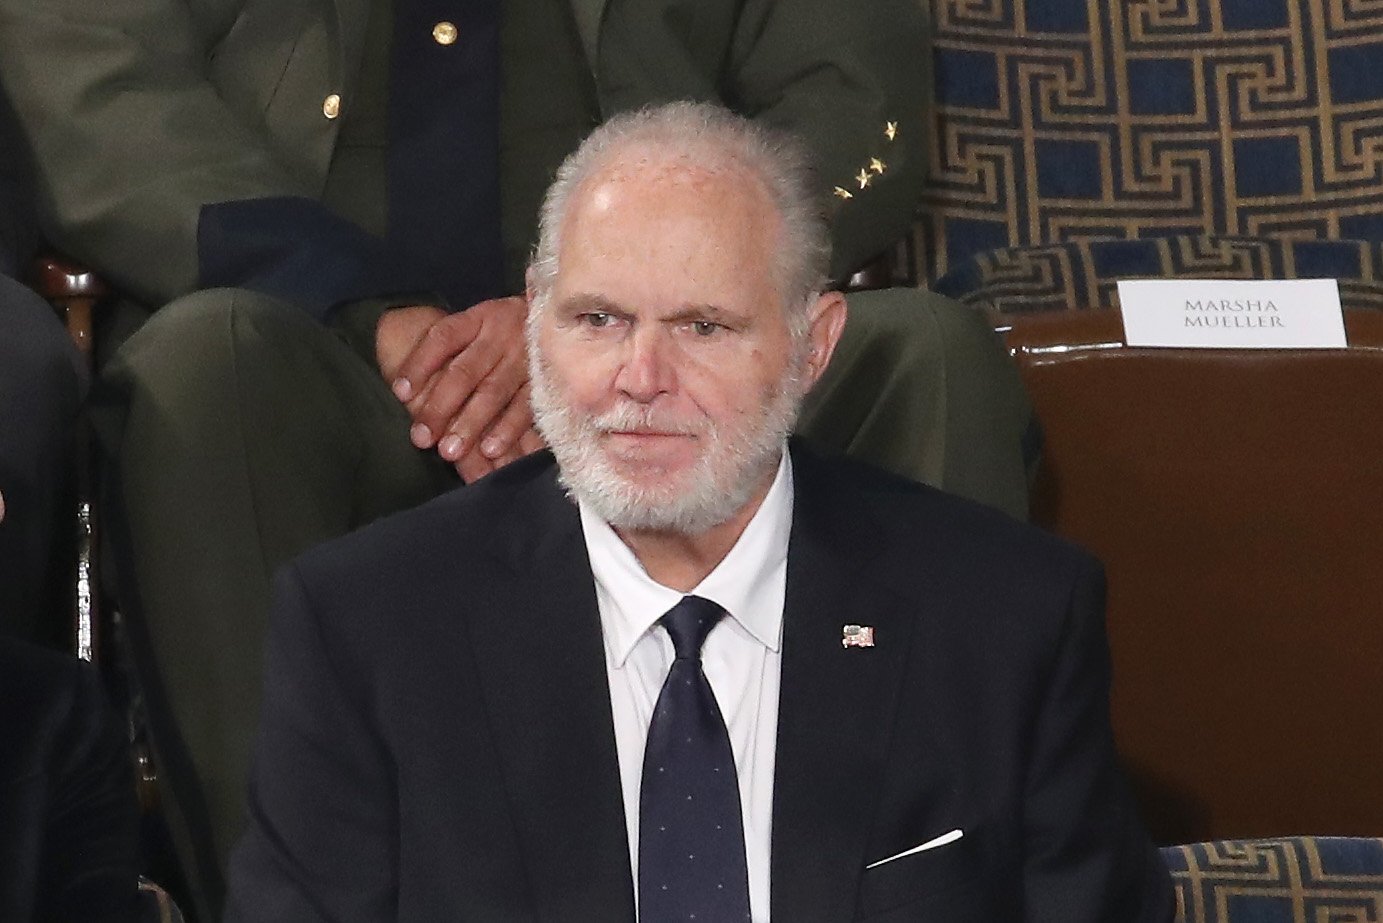 Rush Limbaugh sits in the First Lady's box ahead of the State of the Union address in the chamber of the U.S. House of Representatives on February 04, 2020, in Washington, DC. | Source: Getty Images